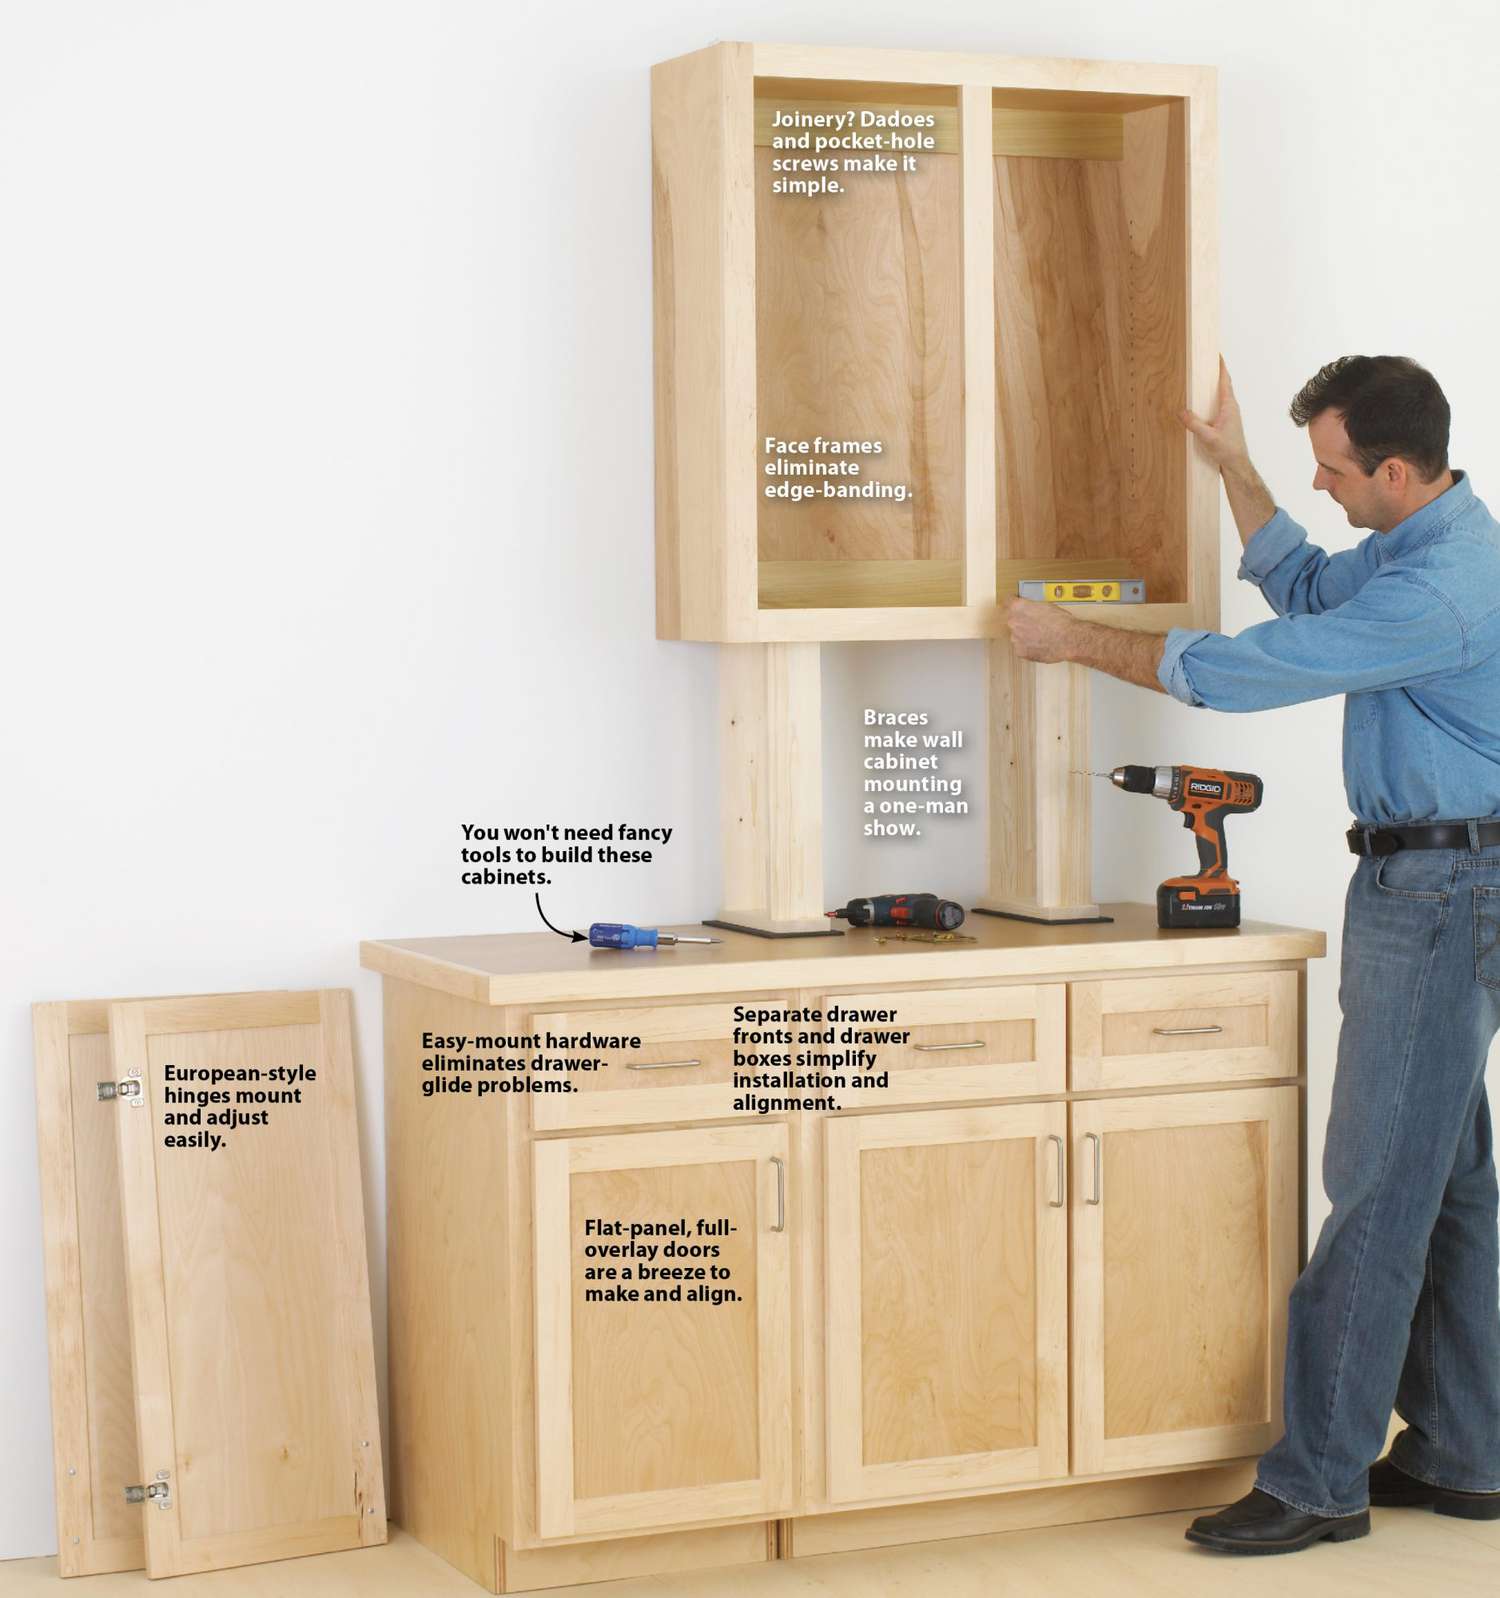 Make Cabinets The Easy Way Wood, How Do You Build Kitchen Cabinets Step By